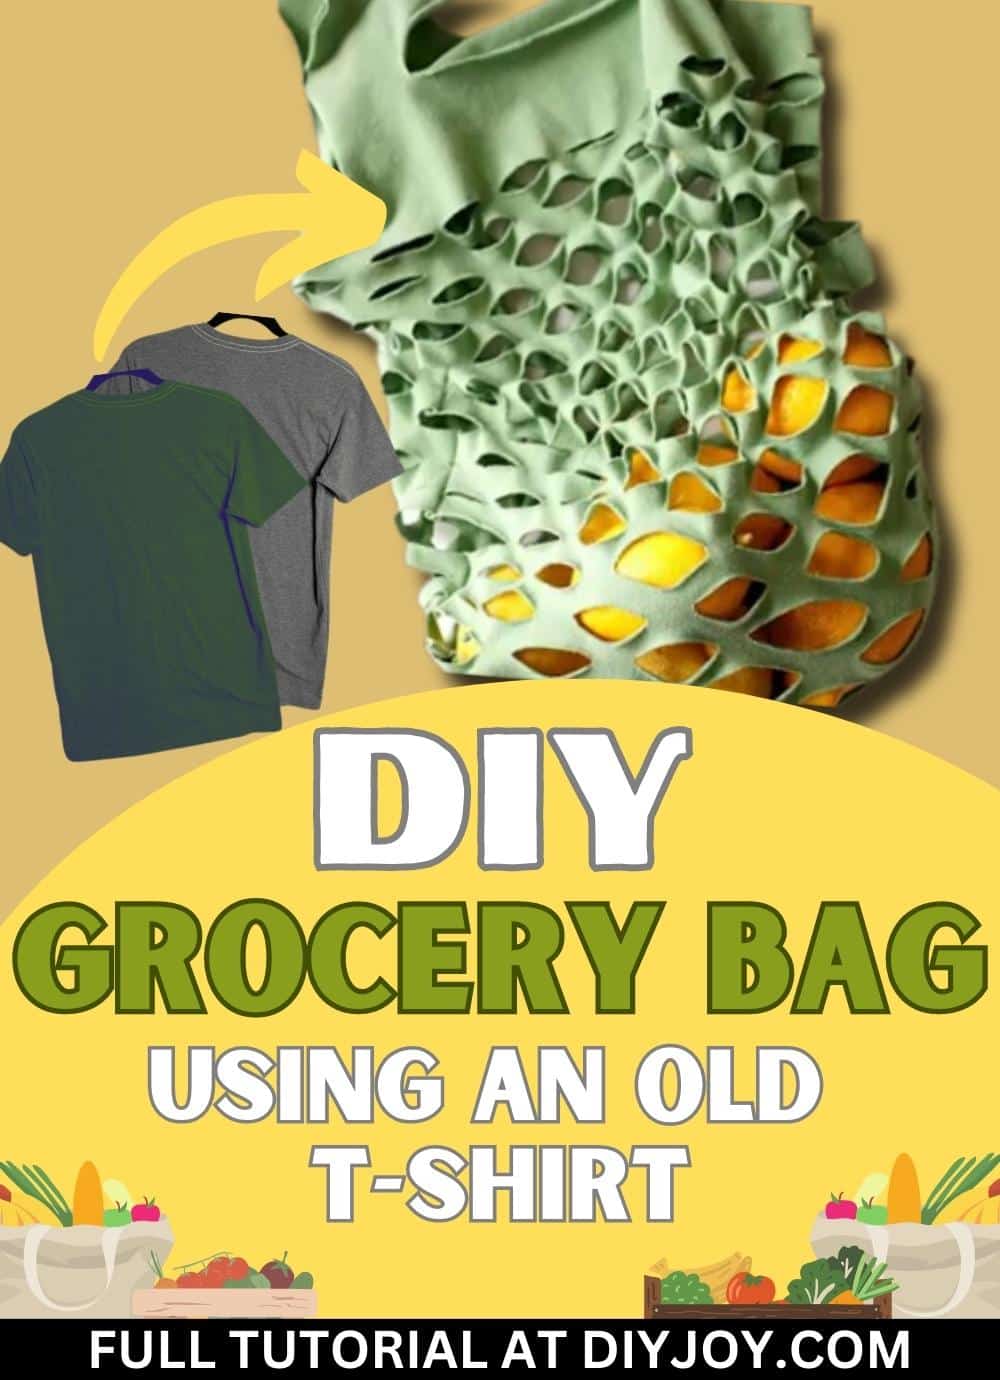 DIY Grocery Bag Out Of An Old T-Shirt Tutorial